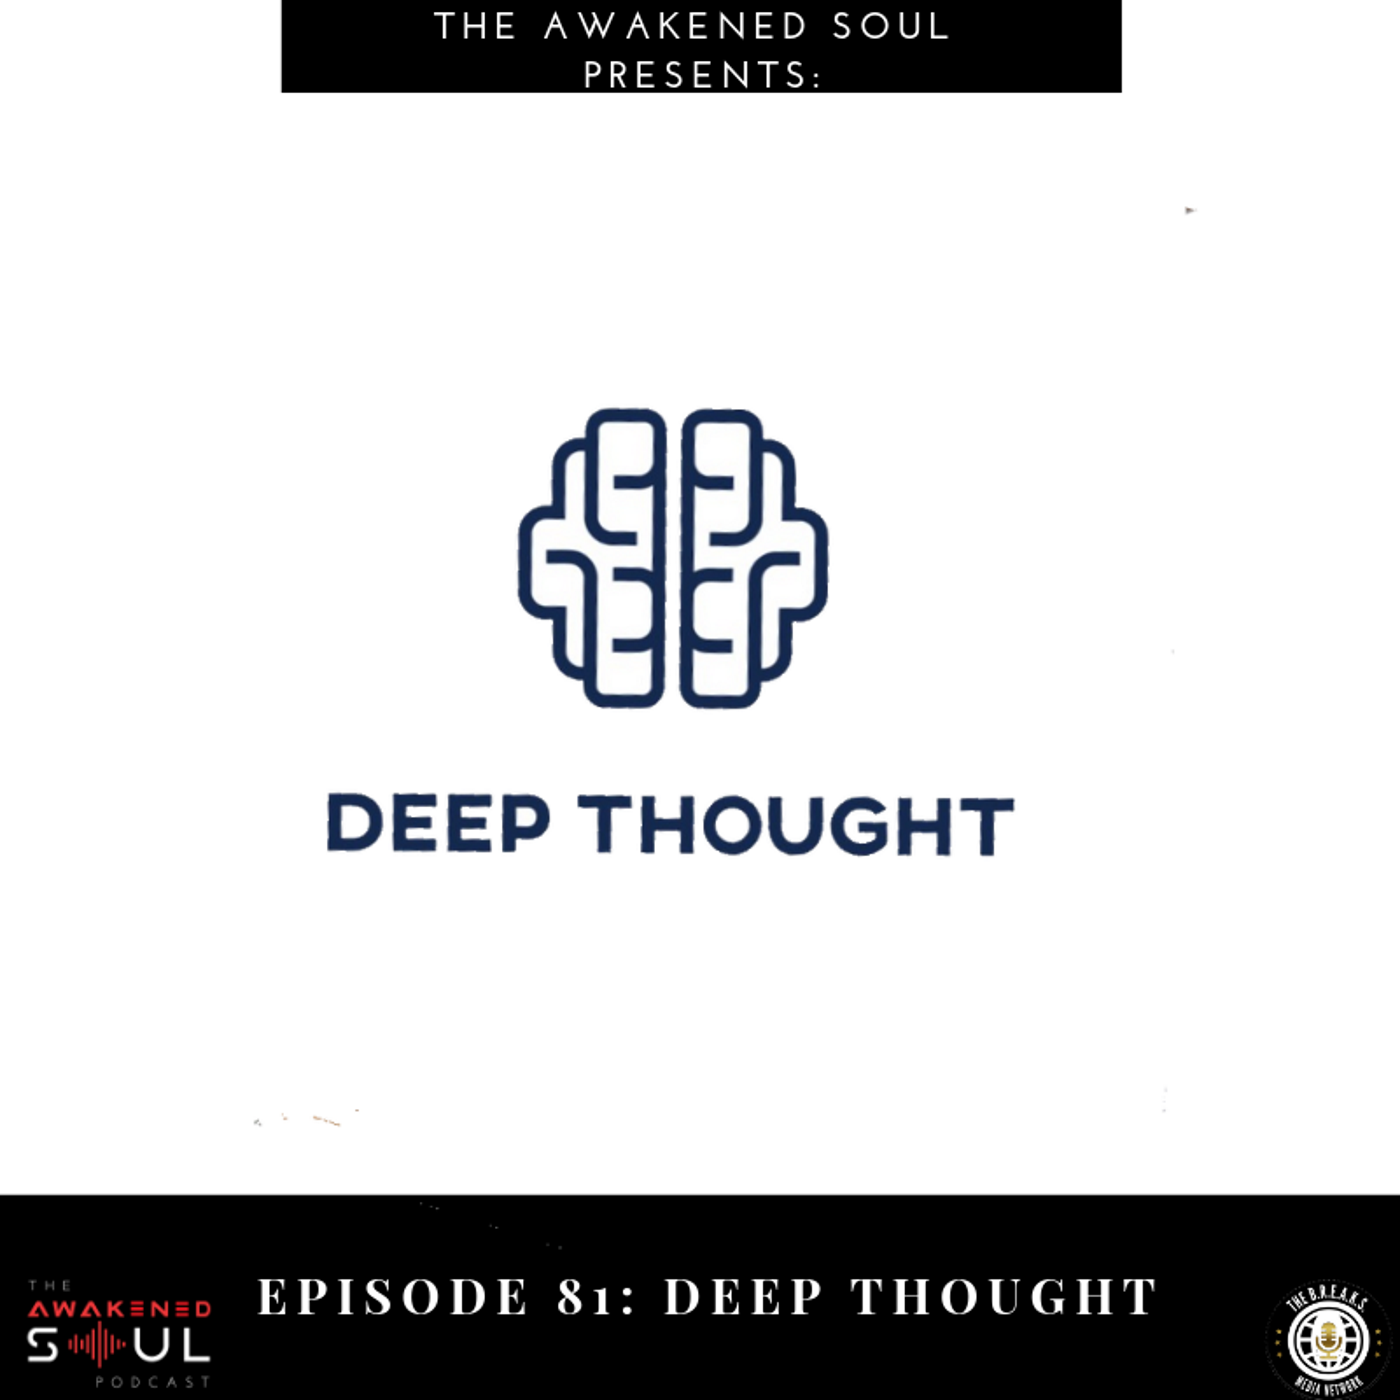 Episode 81: Deep Thought